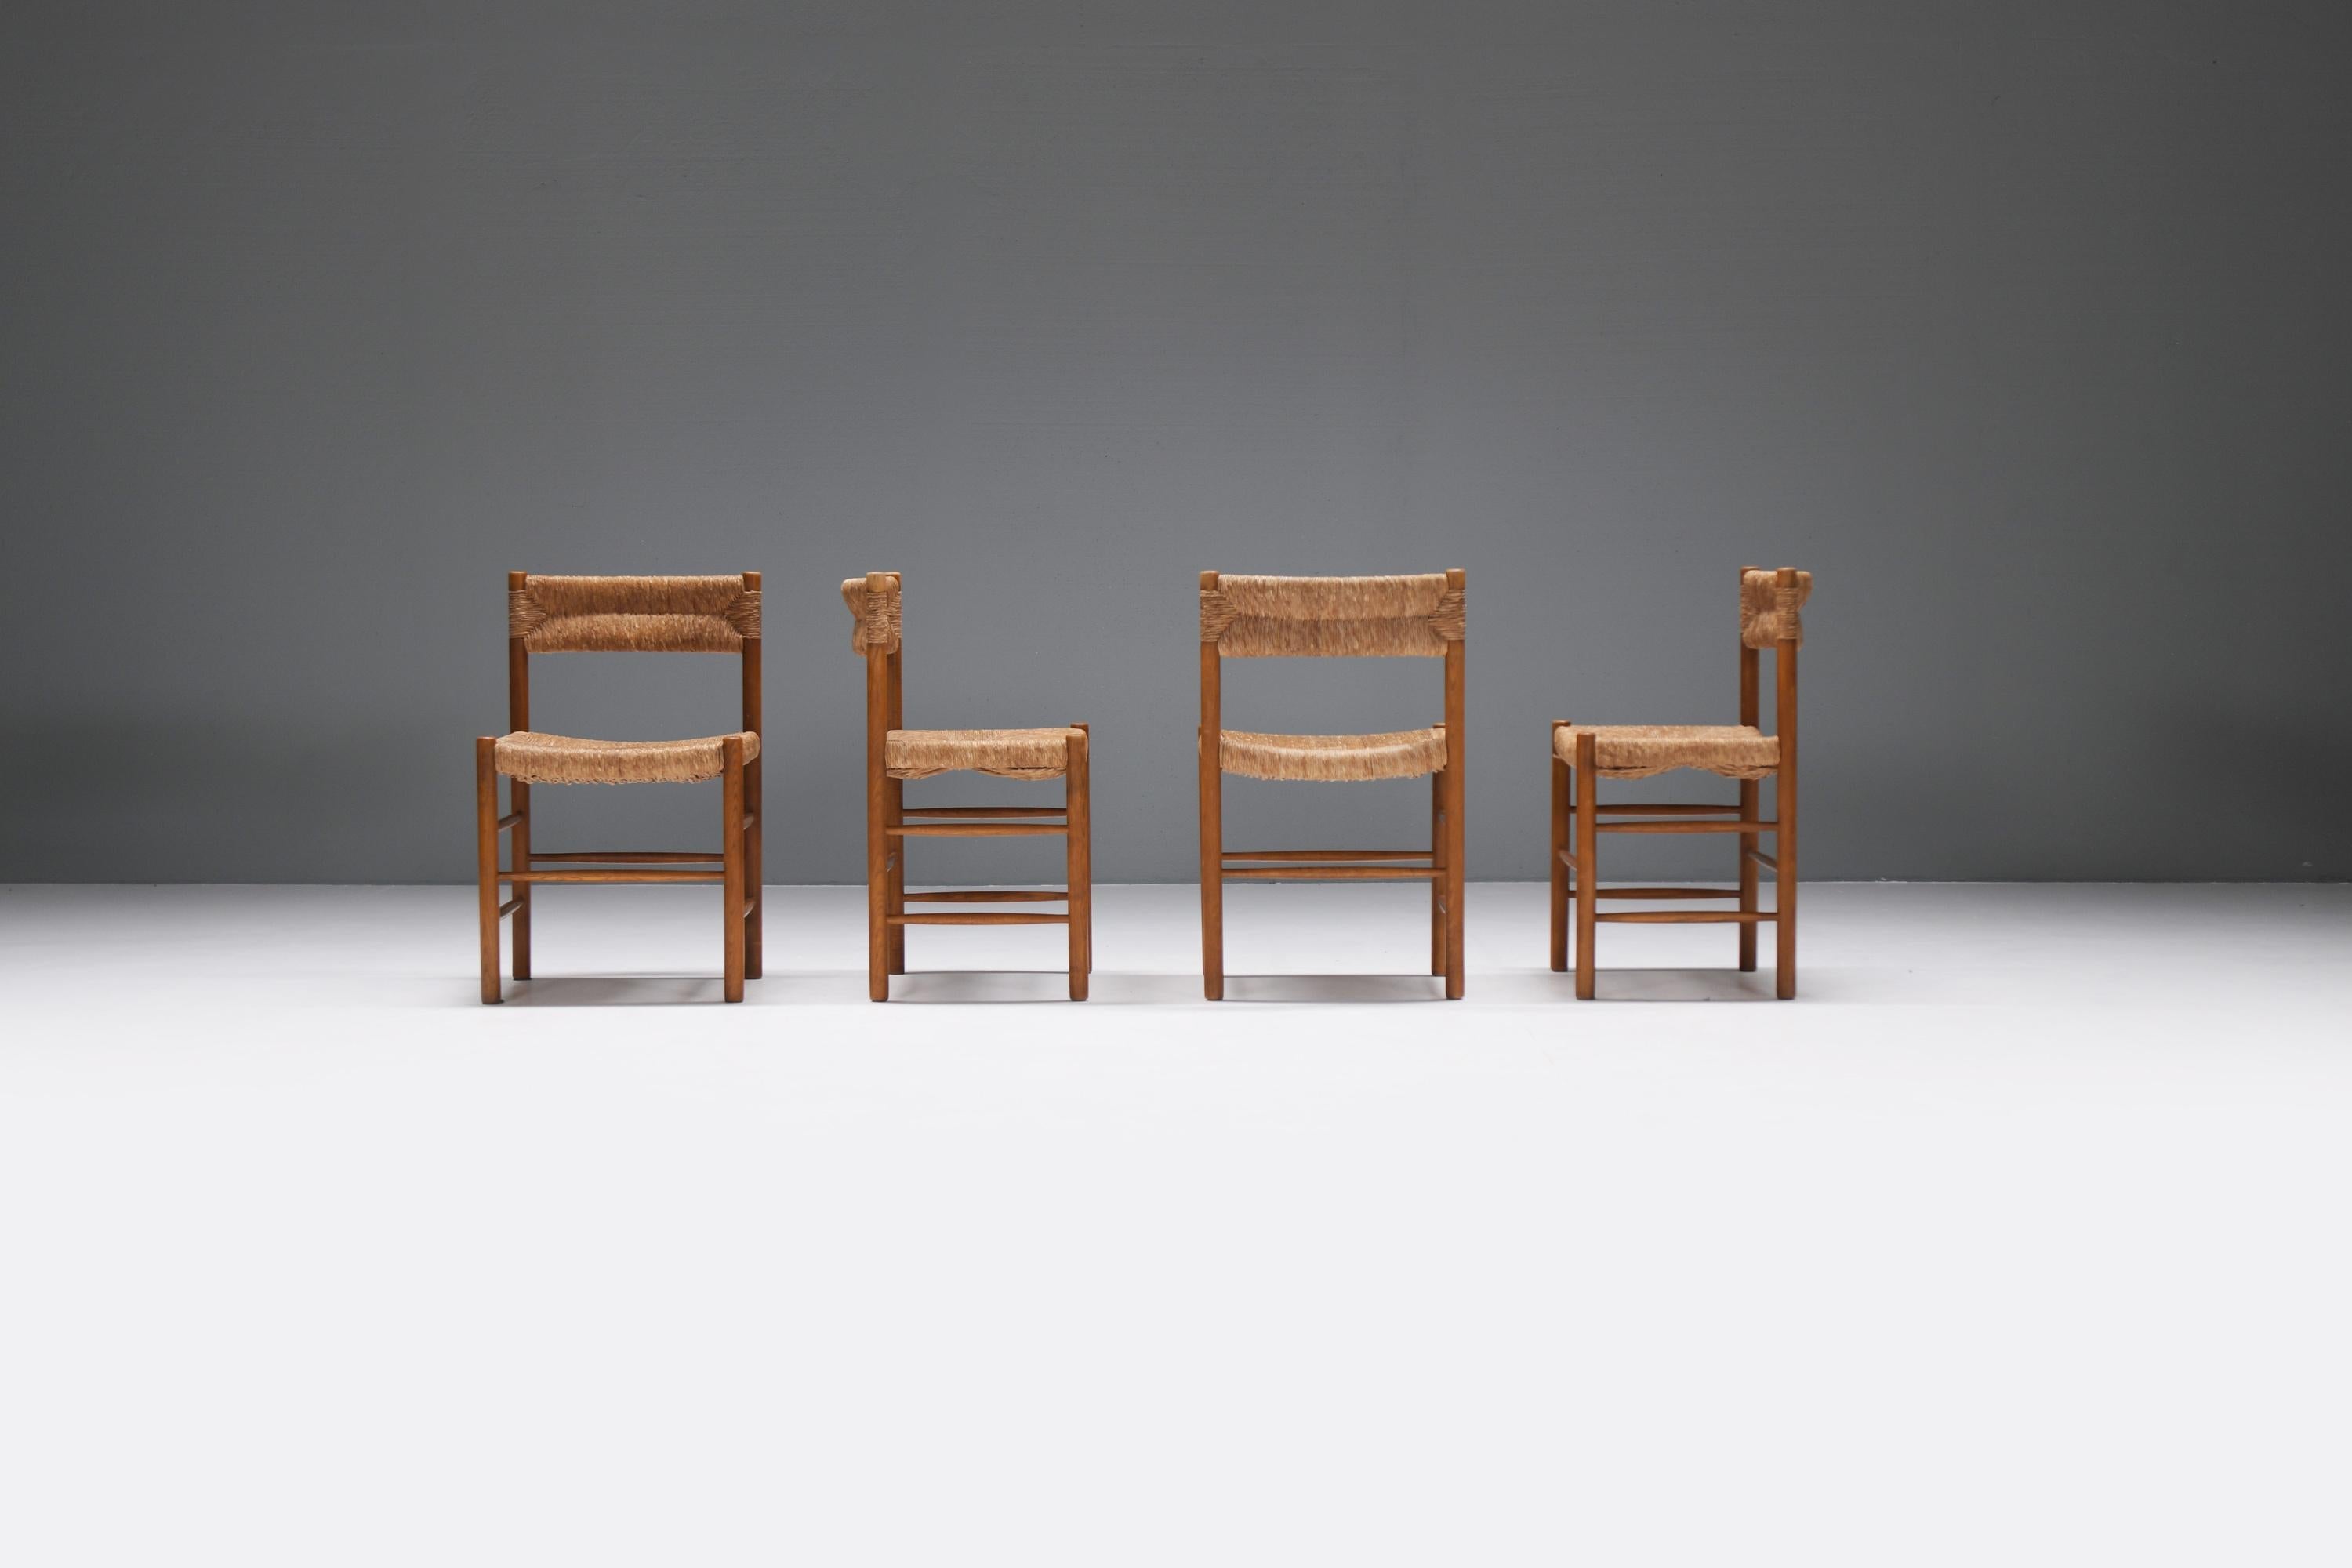 A matching set of 4 vintage ‘Dordogne’ dining chairs in a remarkable original condition. Showing a stunning patina and natural wear on the wood and straw, celebrating the passage of time.
Designed & manufactured at the request of Charlotte Perriand